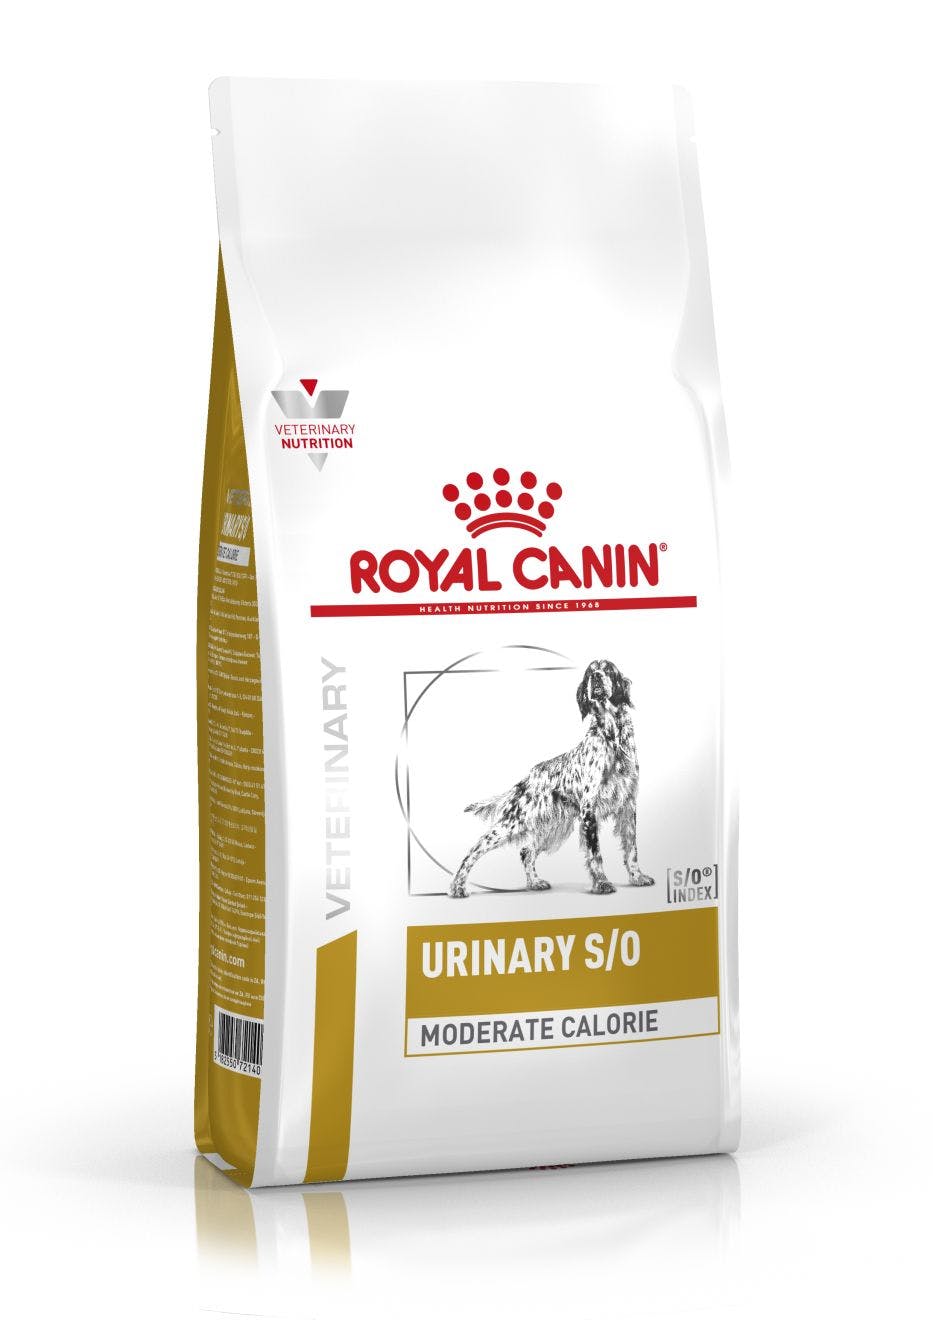 Royal Canin Alimento Seco Urinary SO Moderate Calorie para Perro, 3.5 kg y 8kg